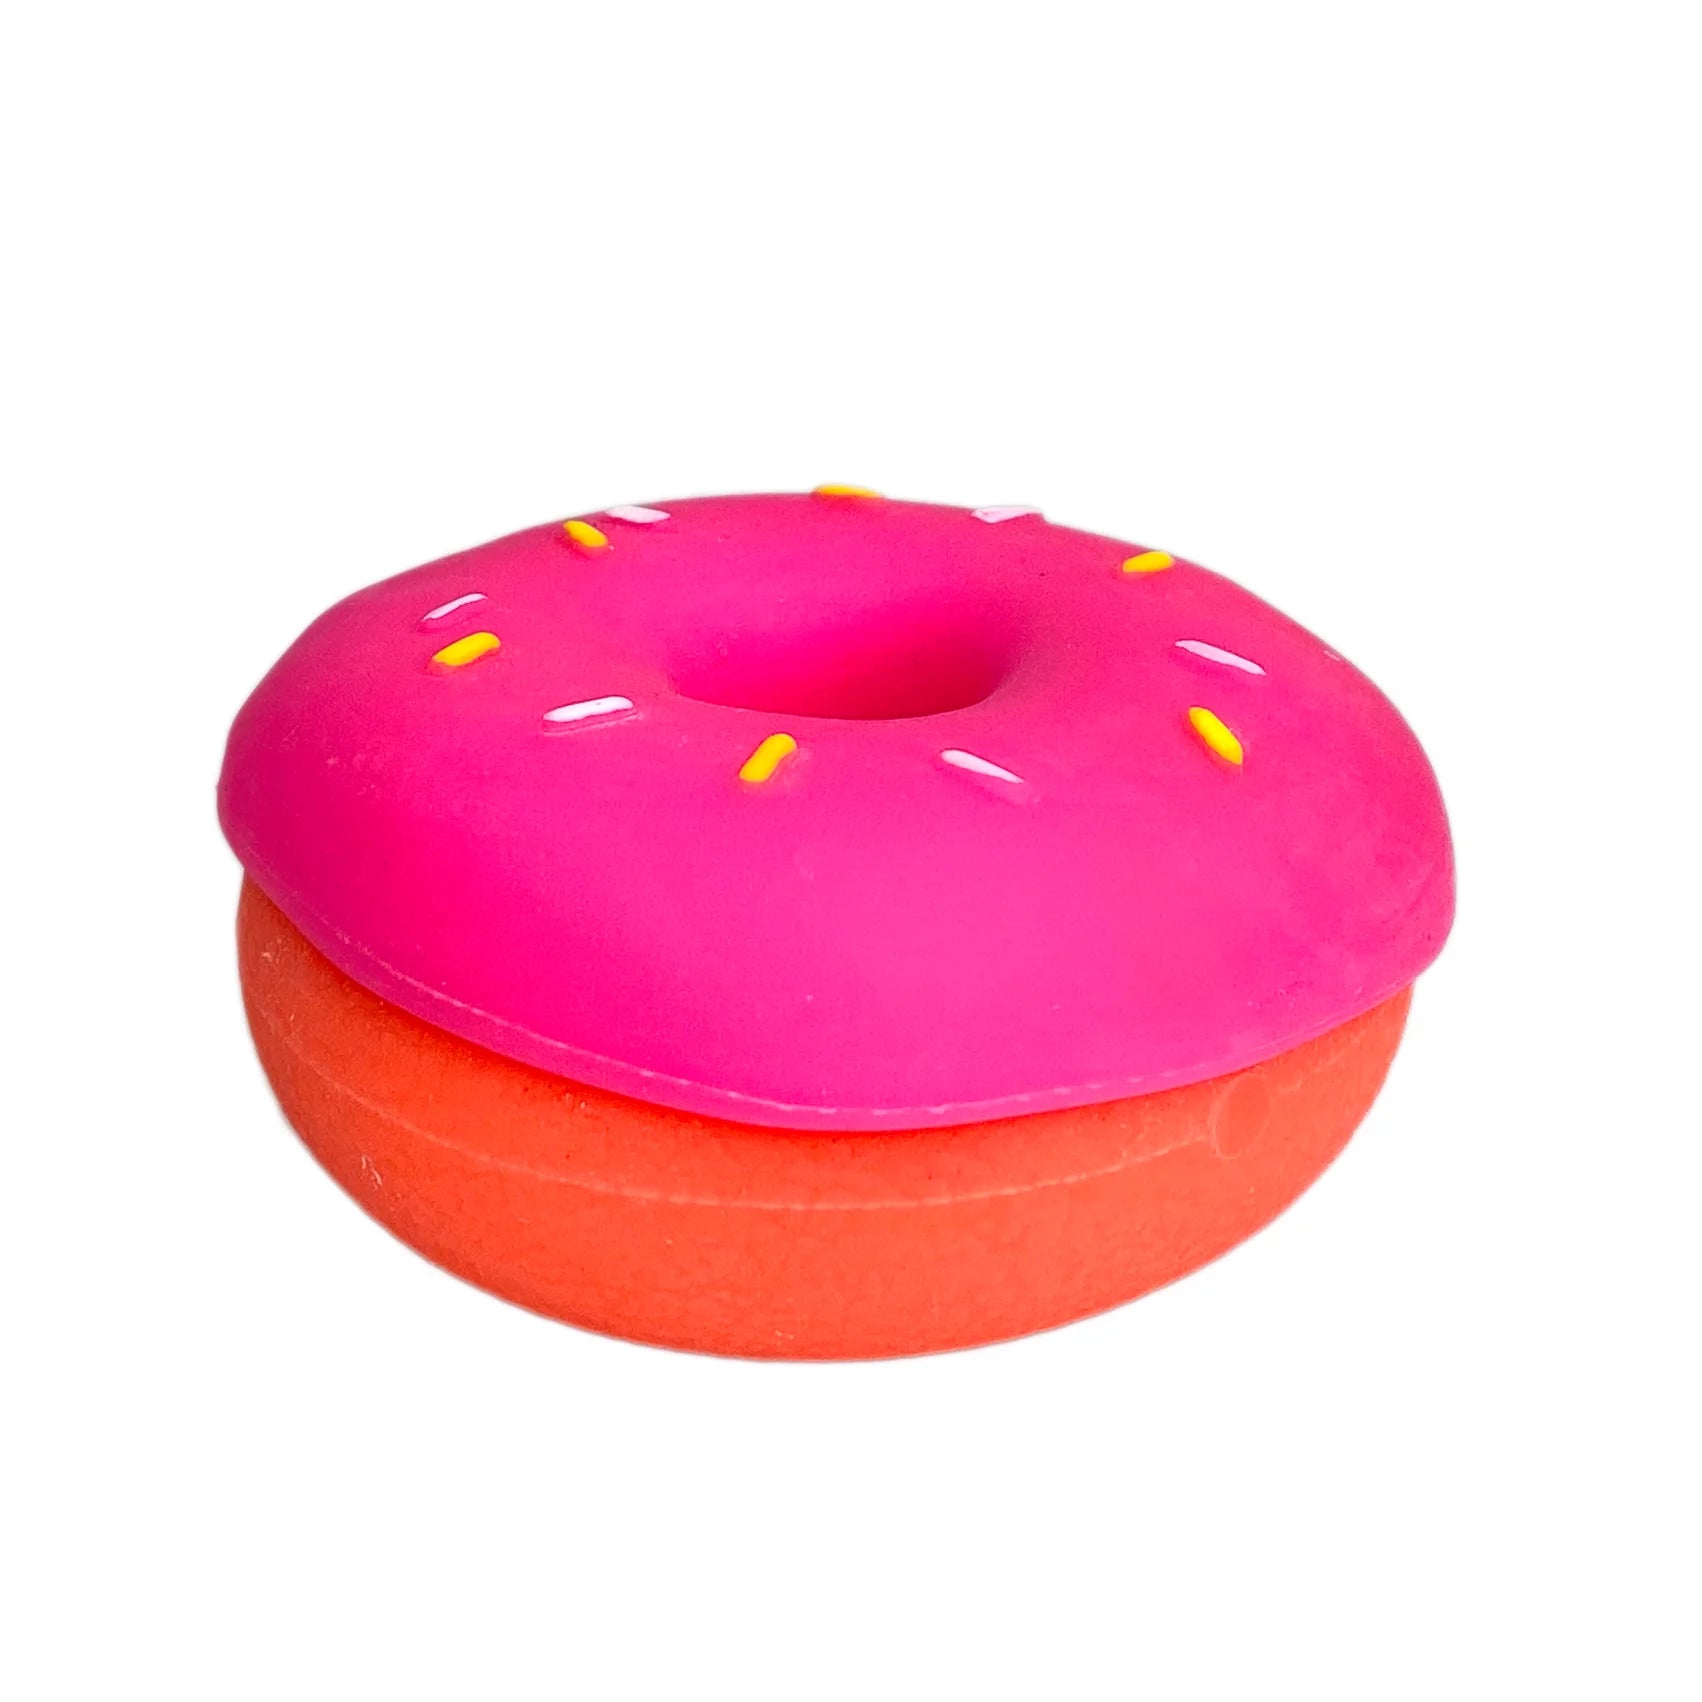 Schylling NeeDoh Dohnuts - Orange with Pink Frosting and Sprinkles